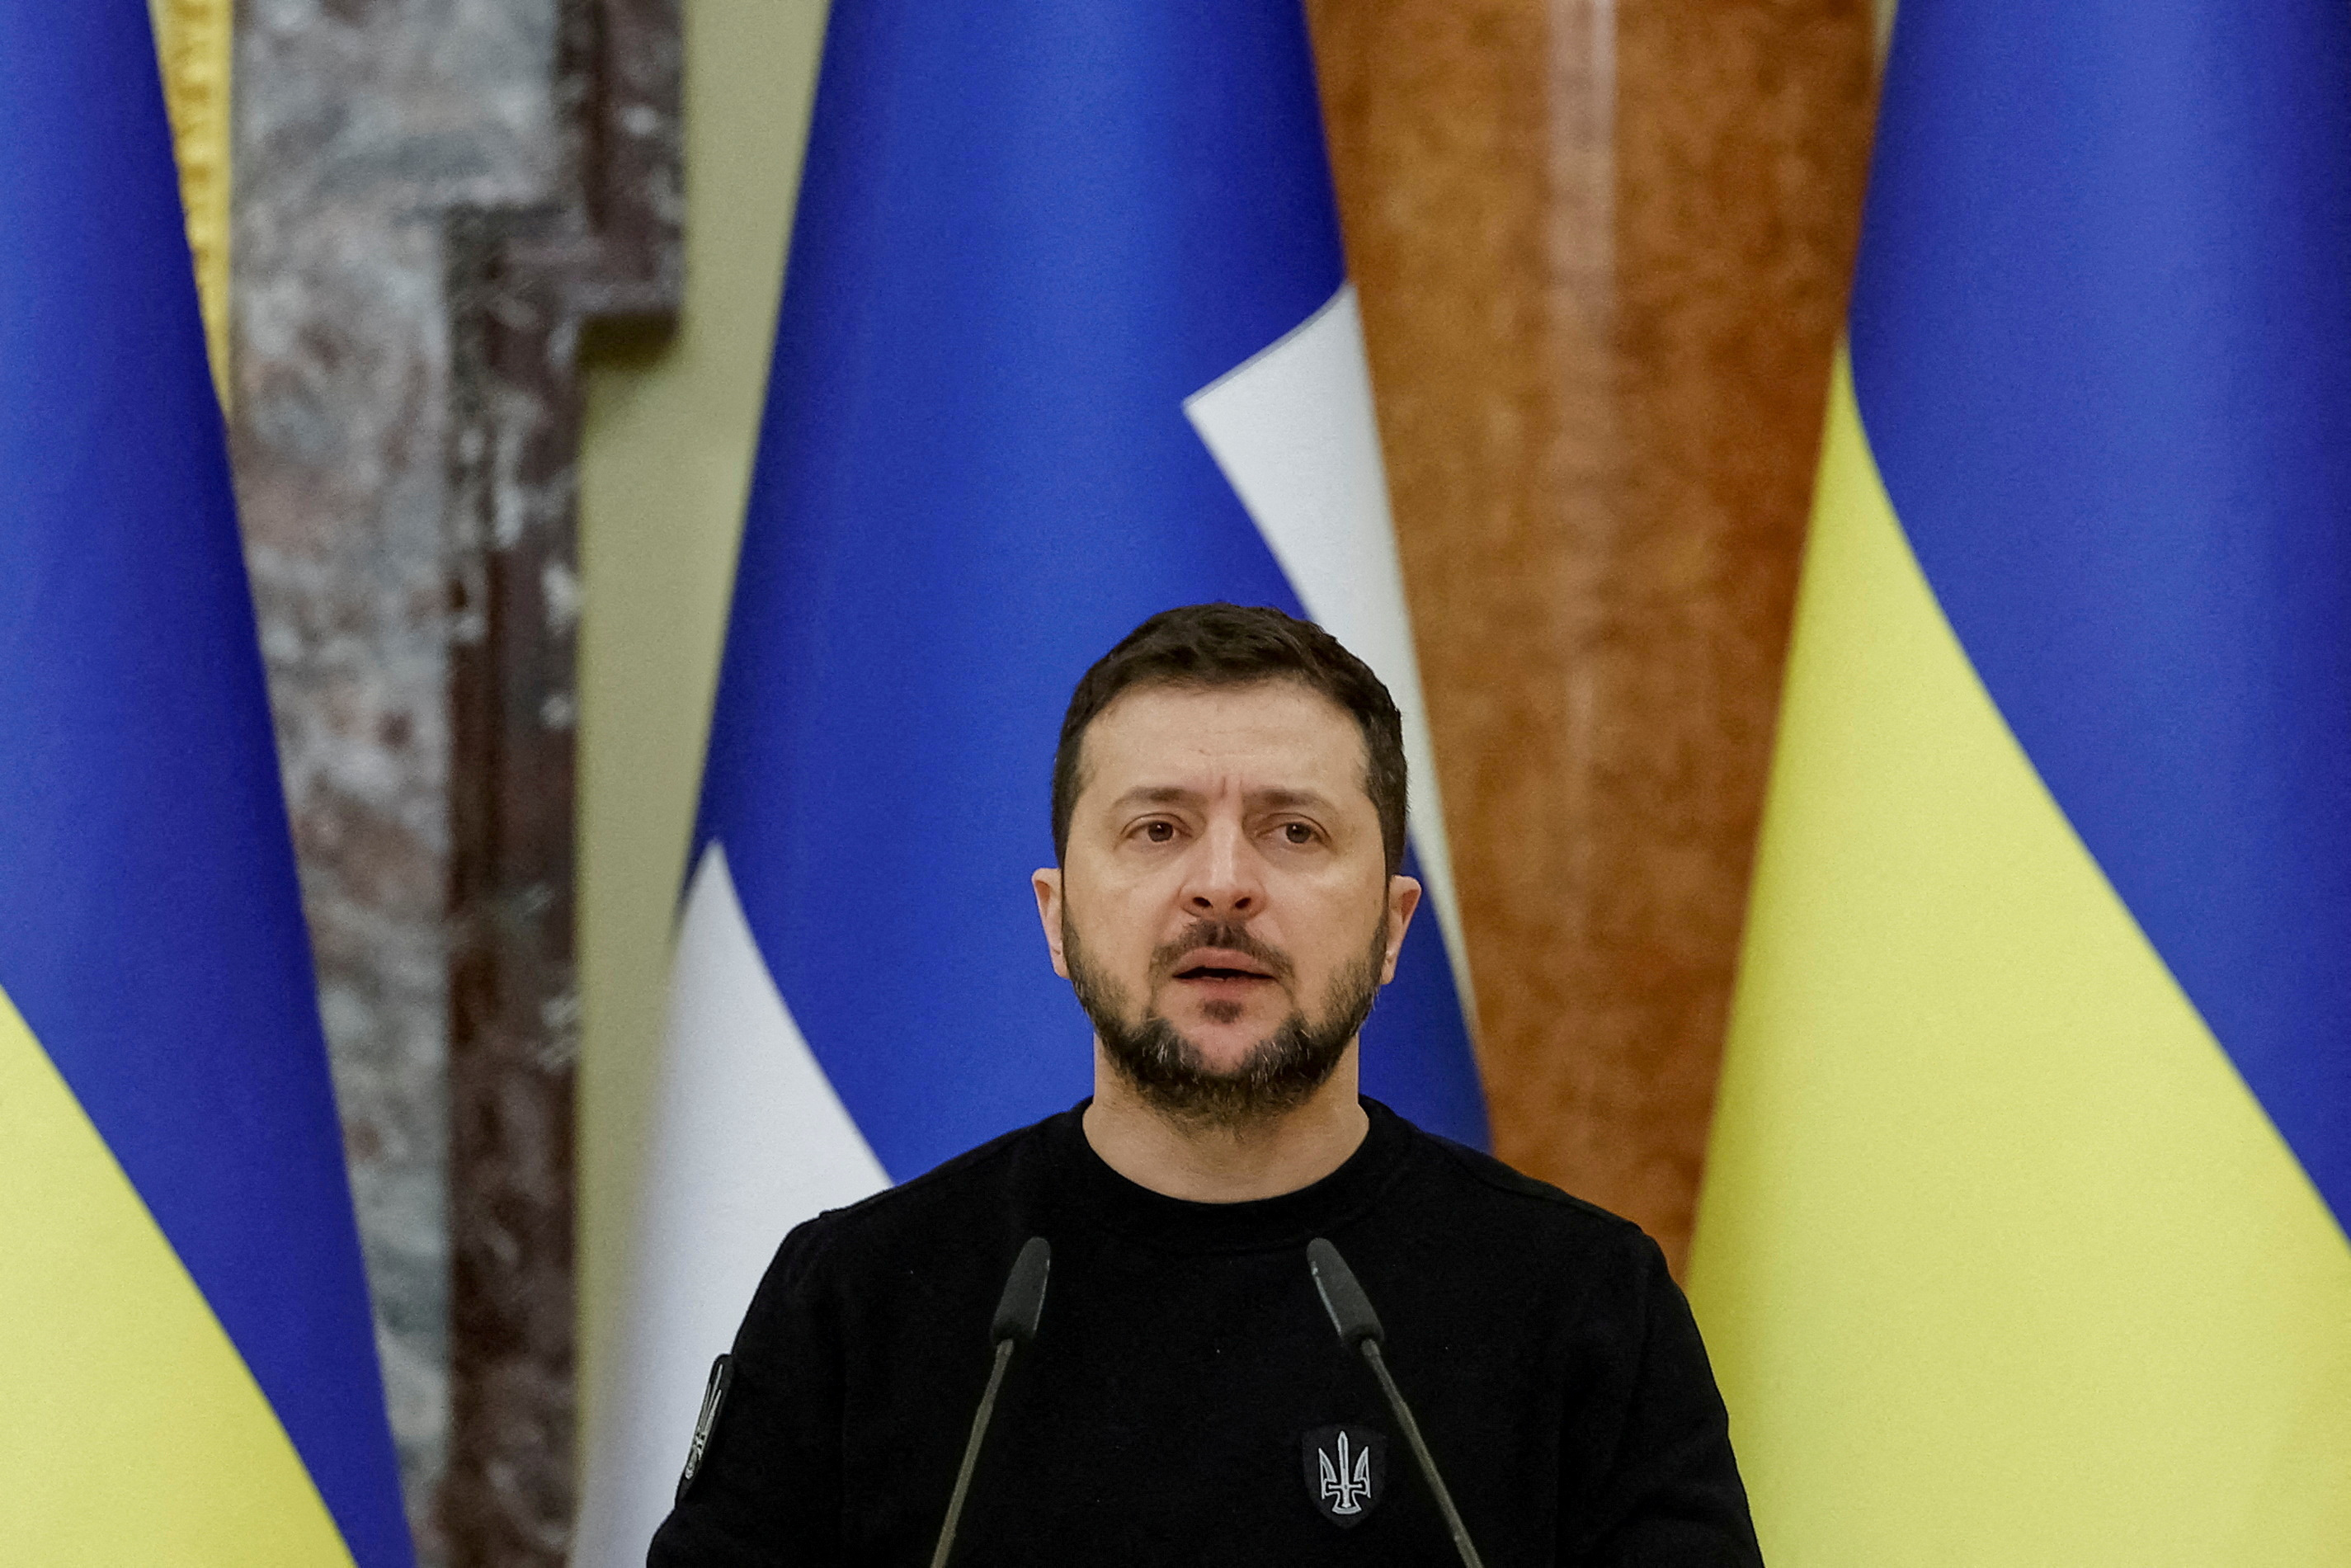 Ukrainian President Zelenskiy attends a joint news briefing with Finnish President Niinisto in Kyiv